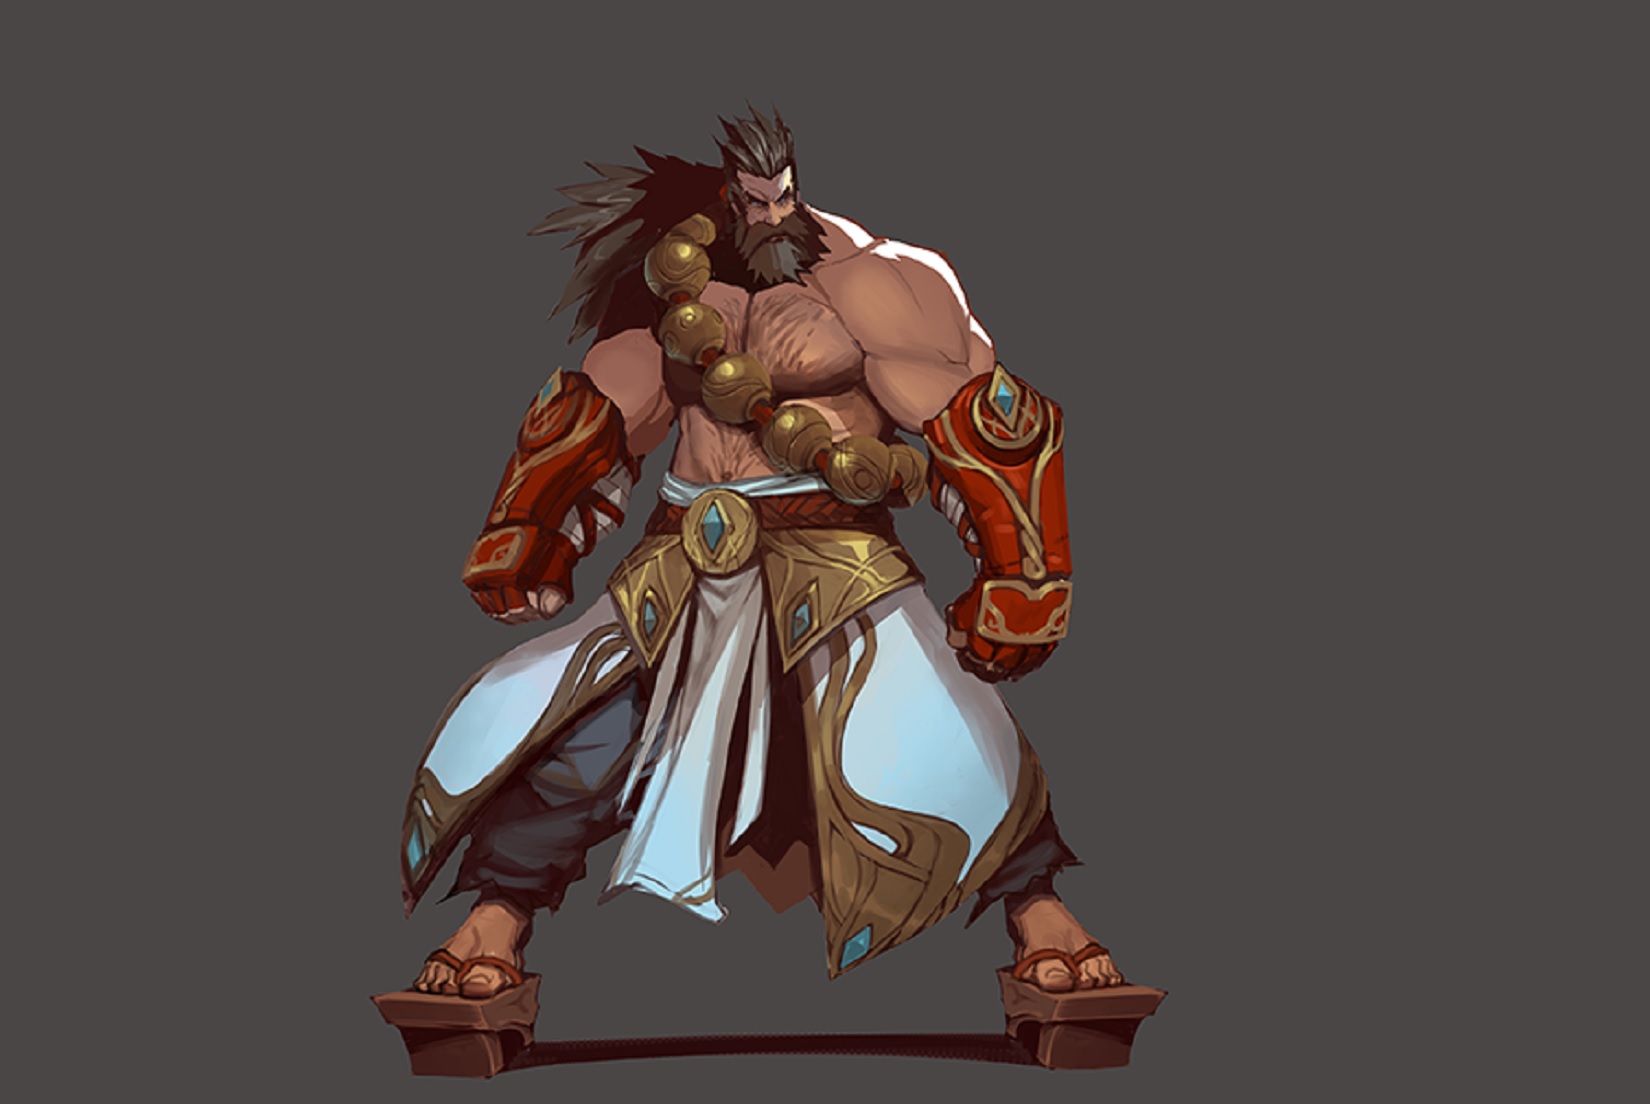 What have they done to our boy Udyr  Why official League of Legends  feels off no more Scandinavian or shaman vibes  Whats your opinion on  that  rLegendsOfRuneterra